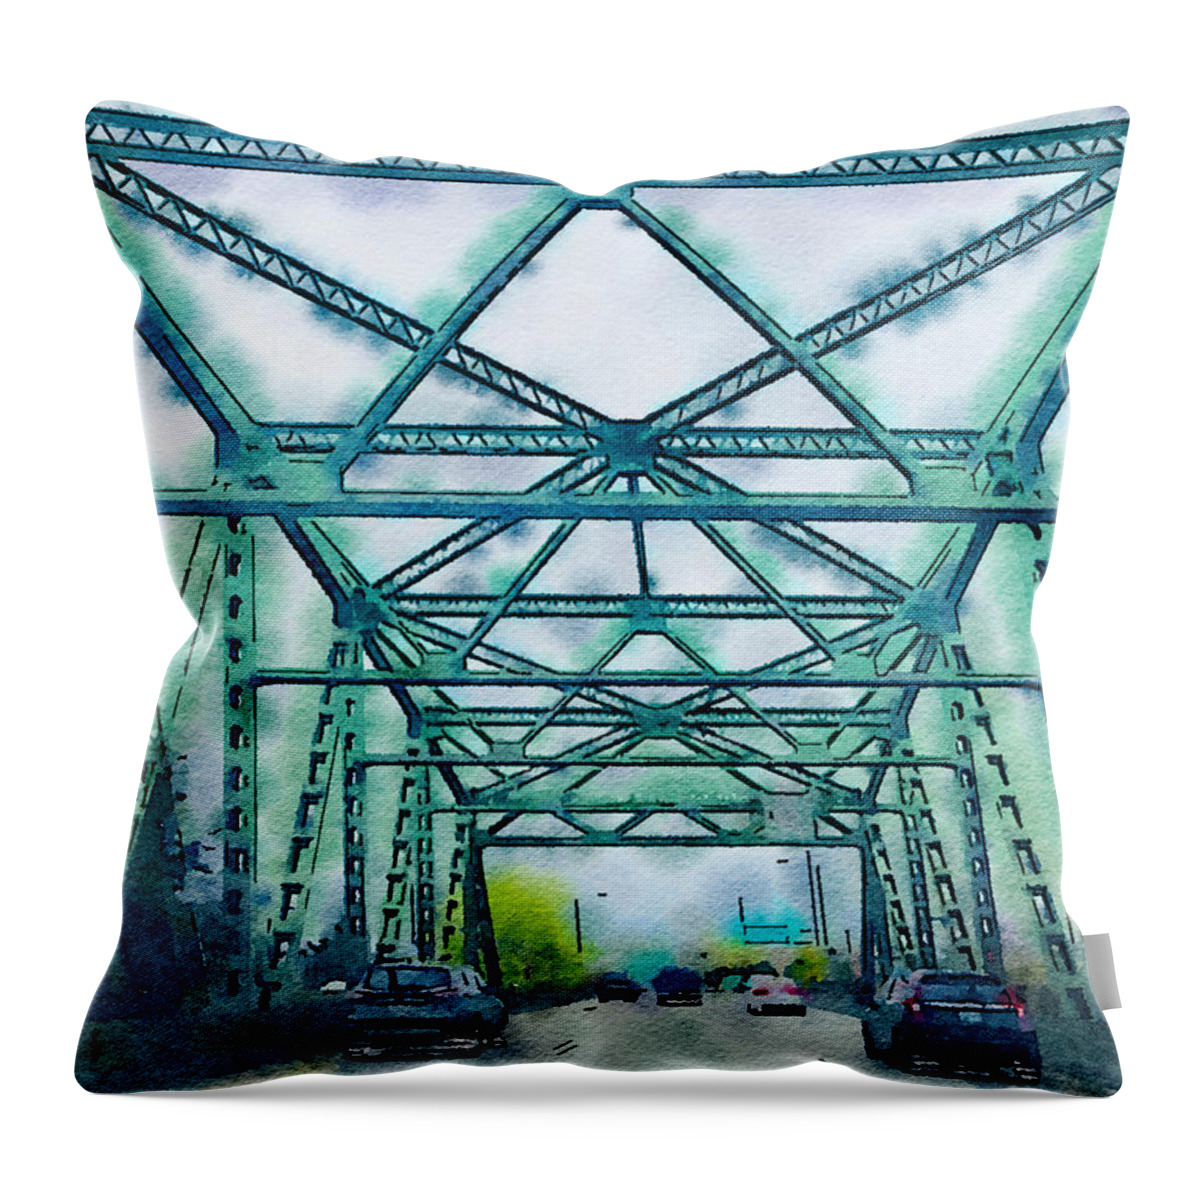 Bridge Throw Pillow featuring the painting Tacoma Bridge by Bonnie Bruno